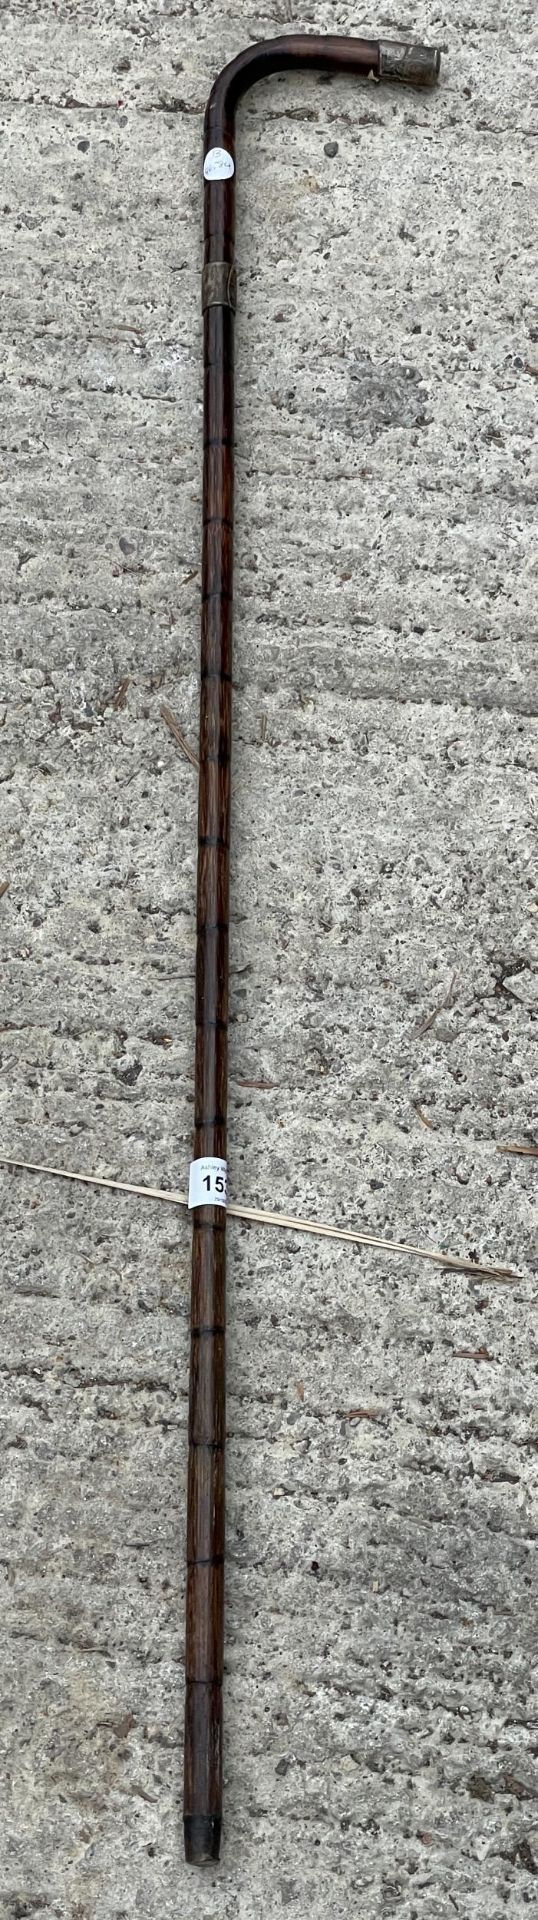 A VINTAGE WOODEN WALKING STICK WITH HALLMARKED SILVER COLLARS